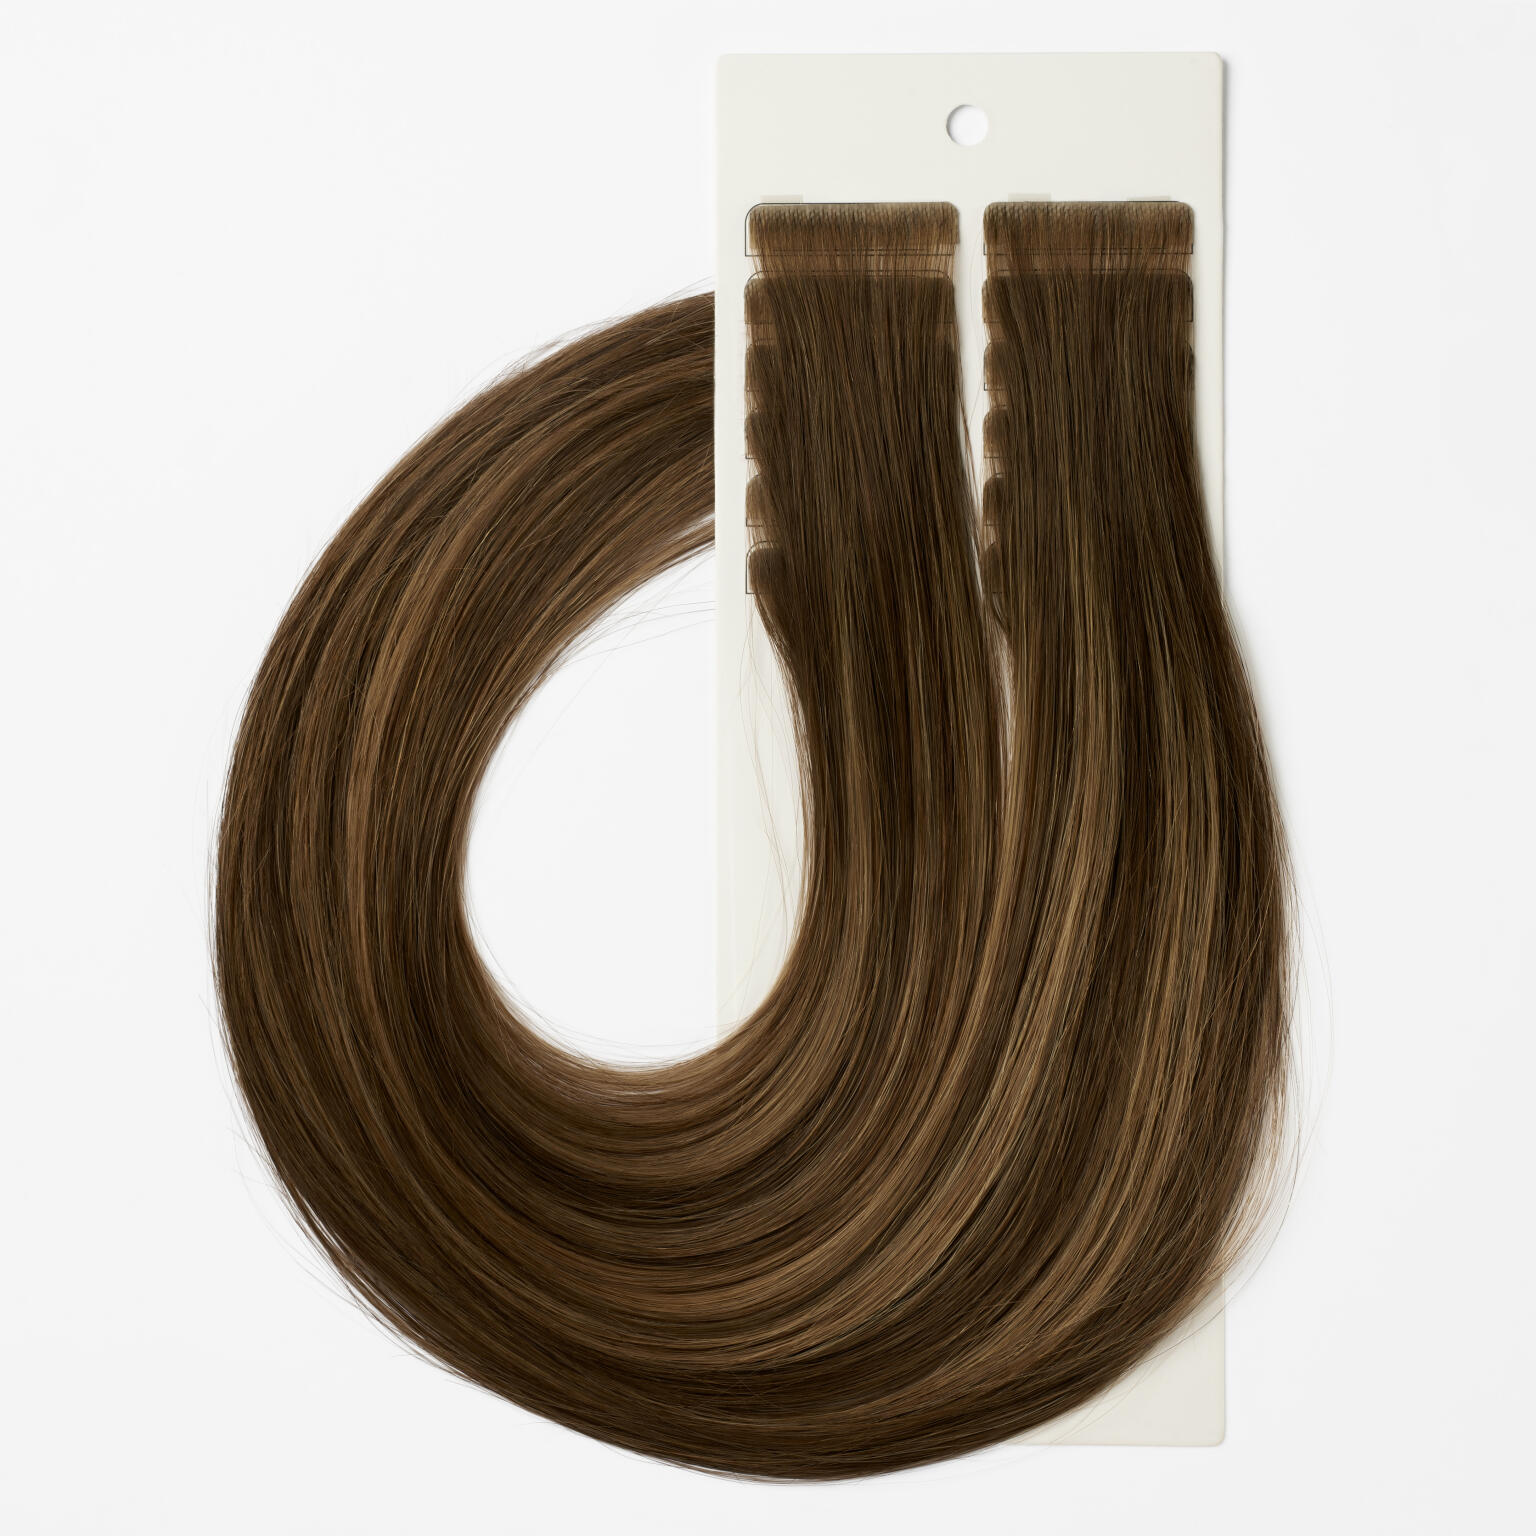 Luxe Tape Extensions Seamless 4 CM4.63/7.0 60 cm